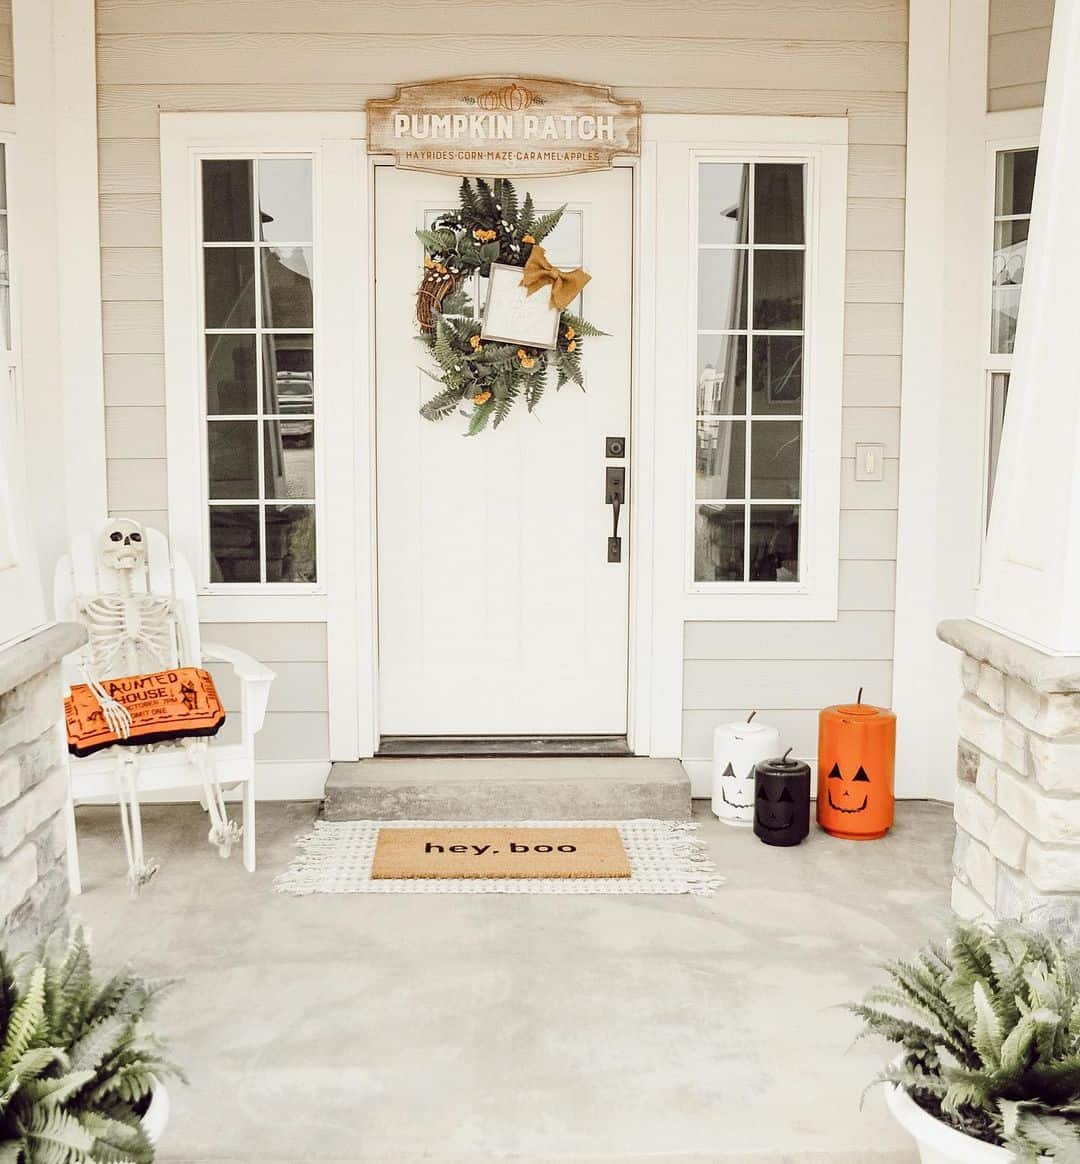 34 Farmhouse Front Door Fall Wreath Ideas To Charm Visitors